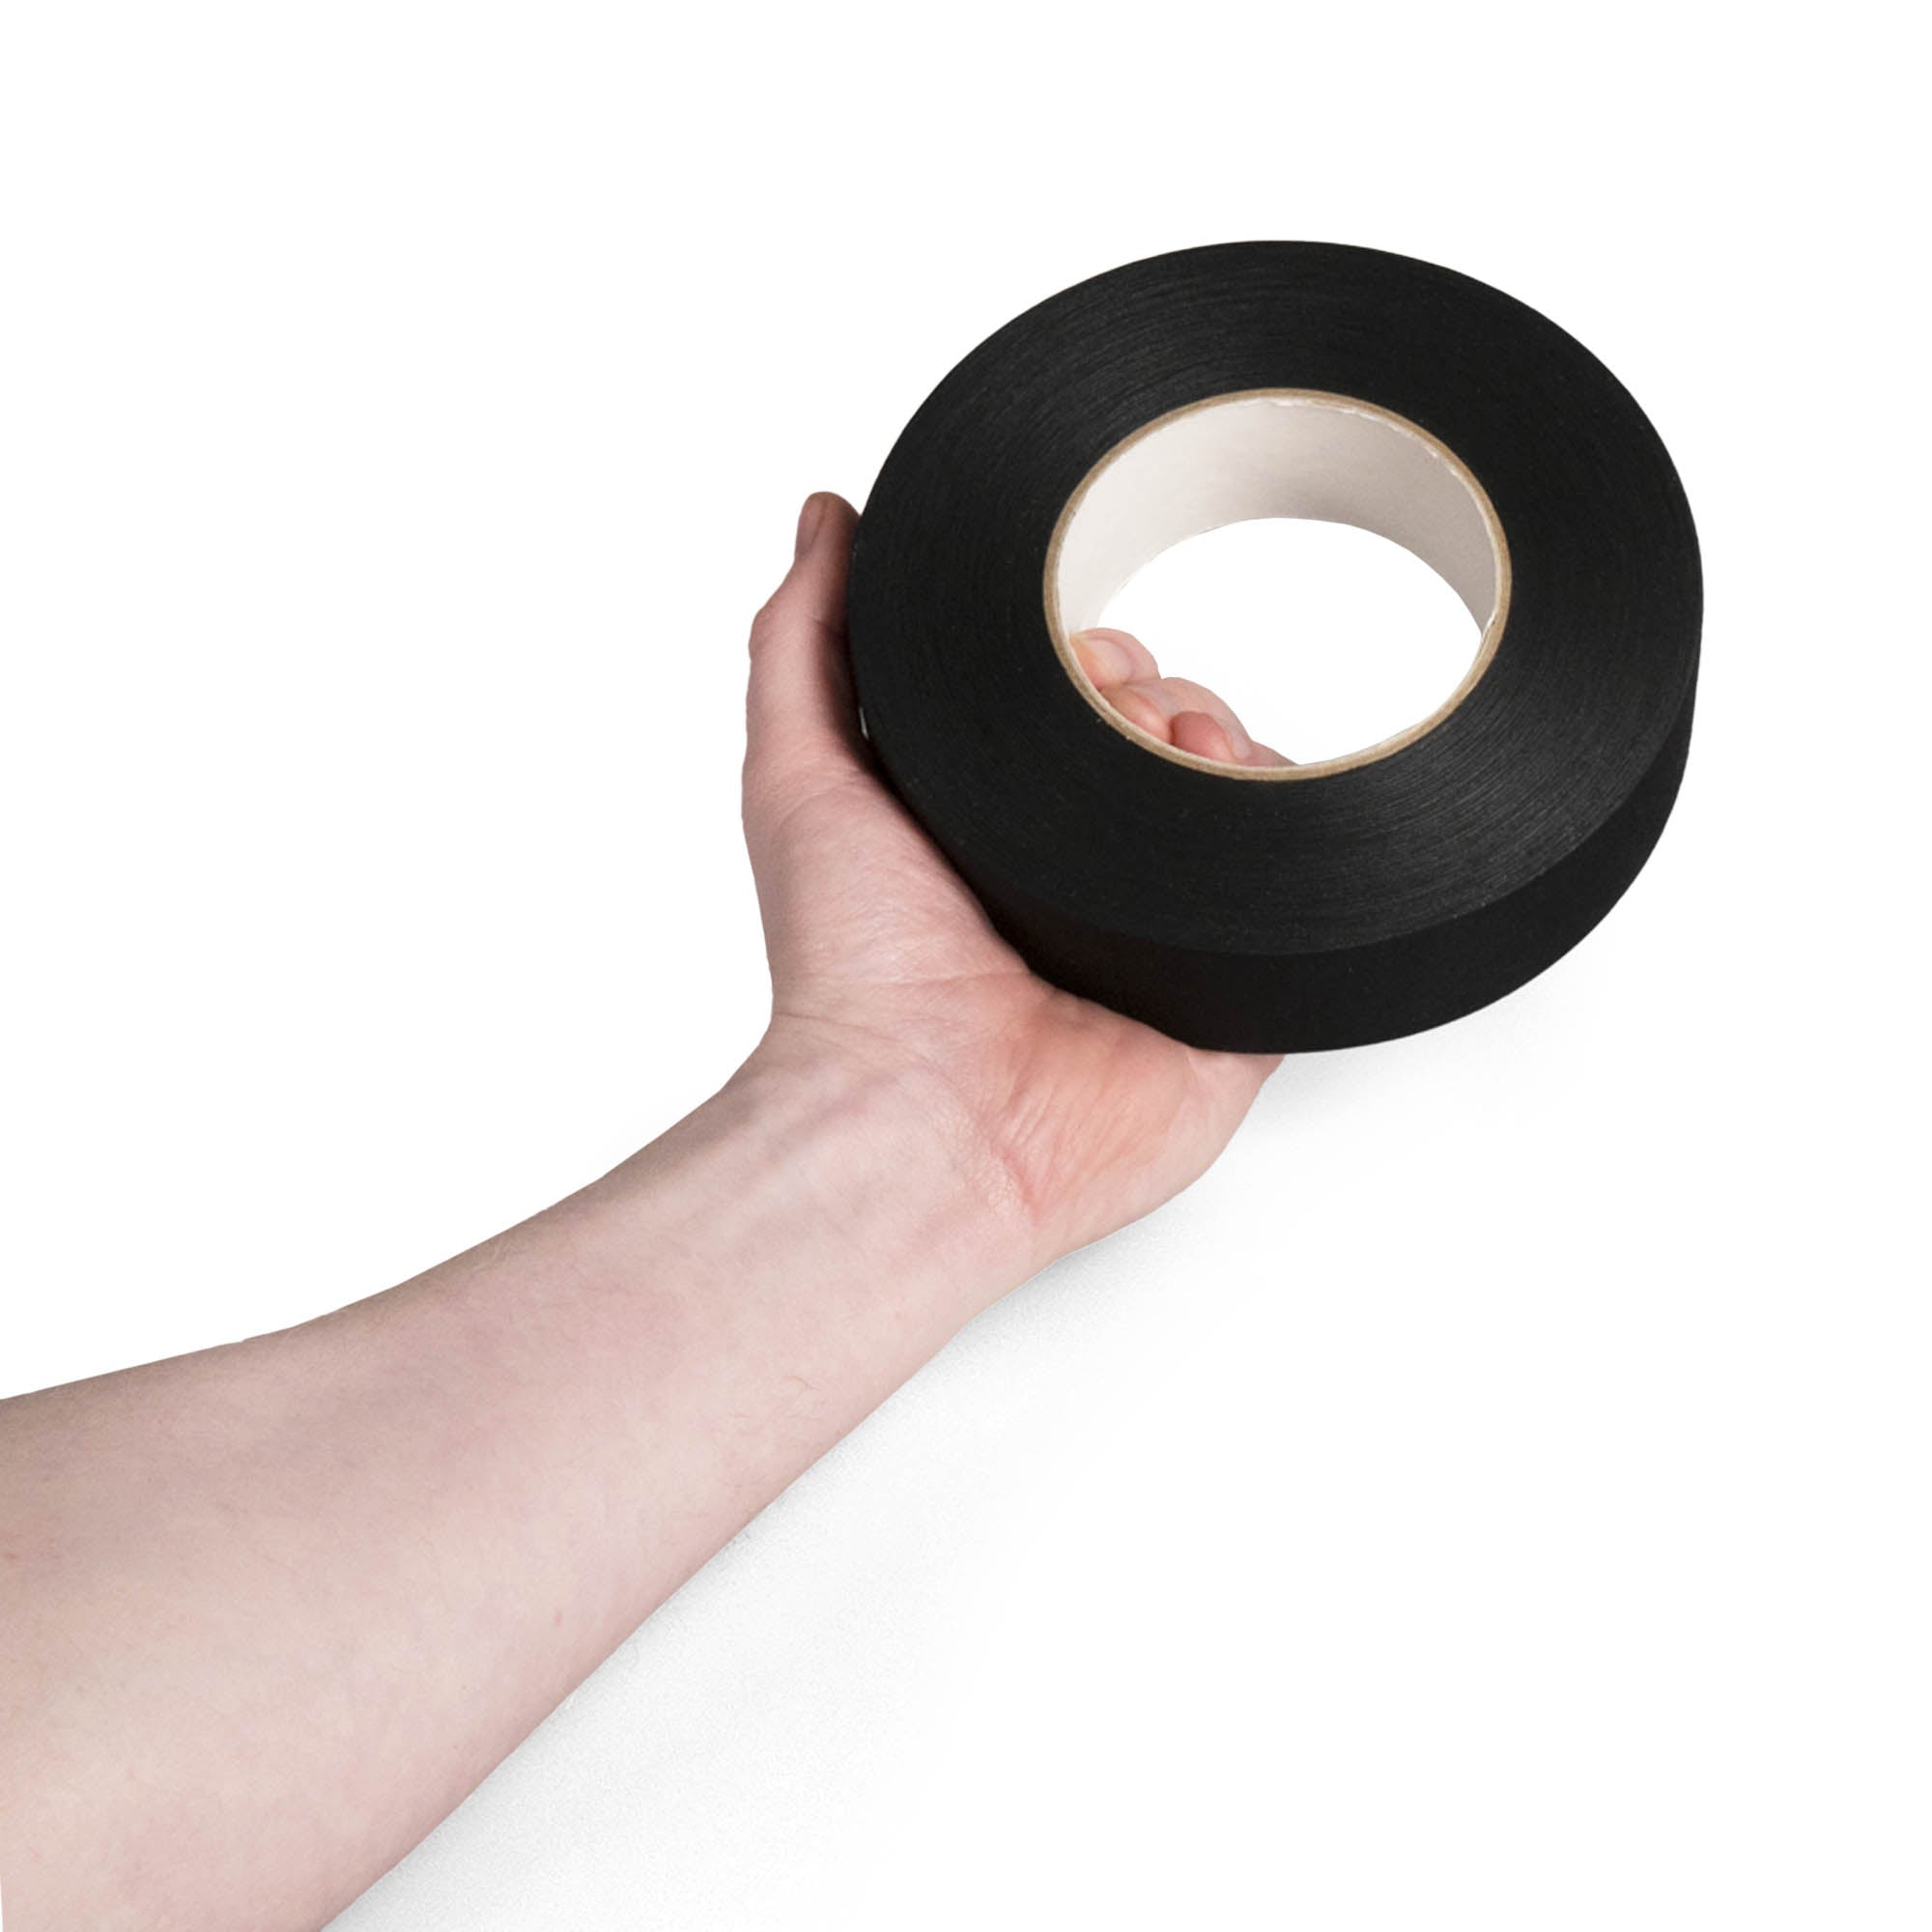  black 3.8cm wide tape in hand